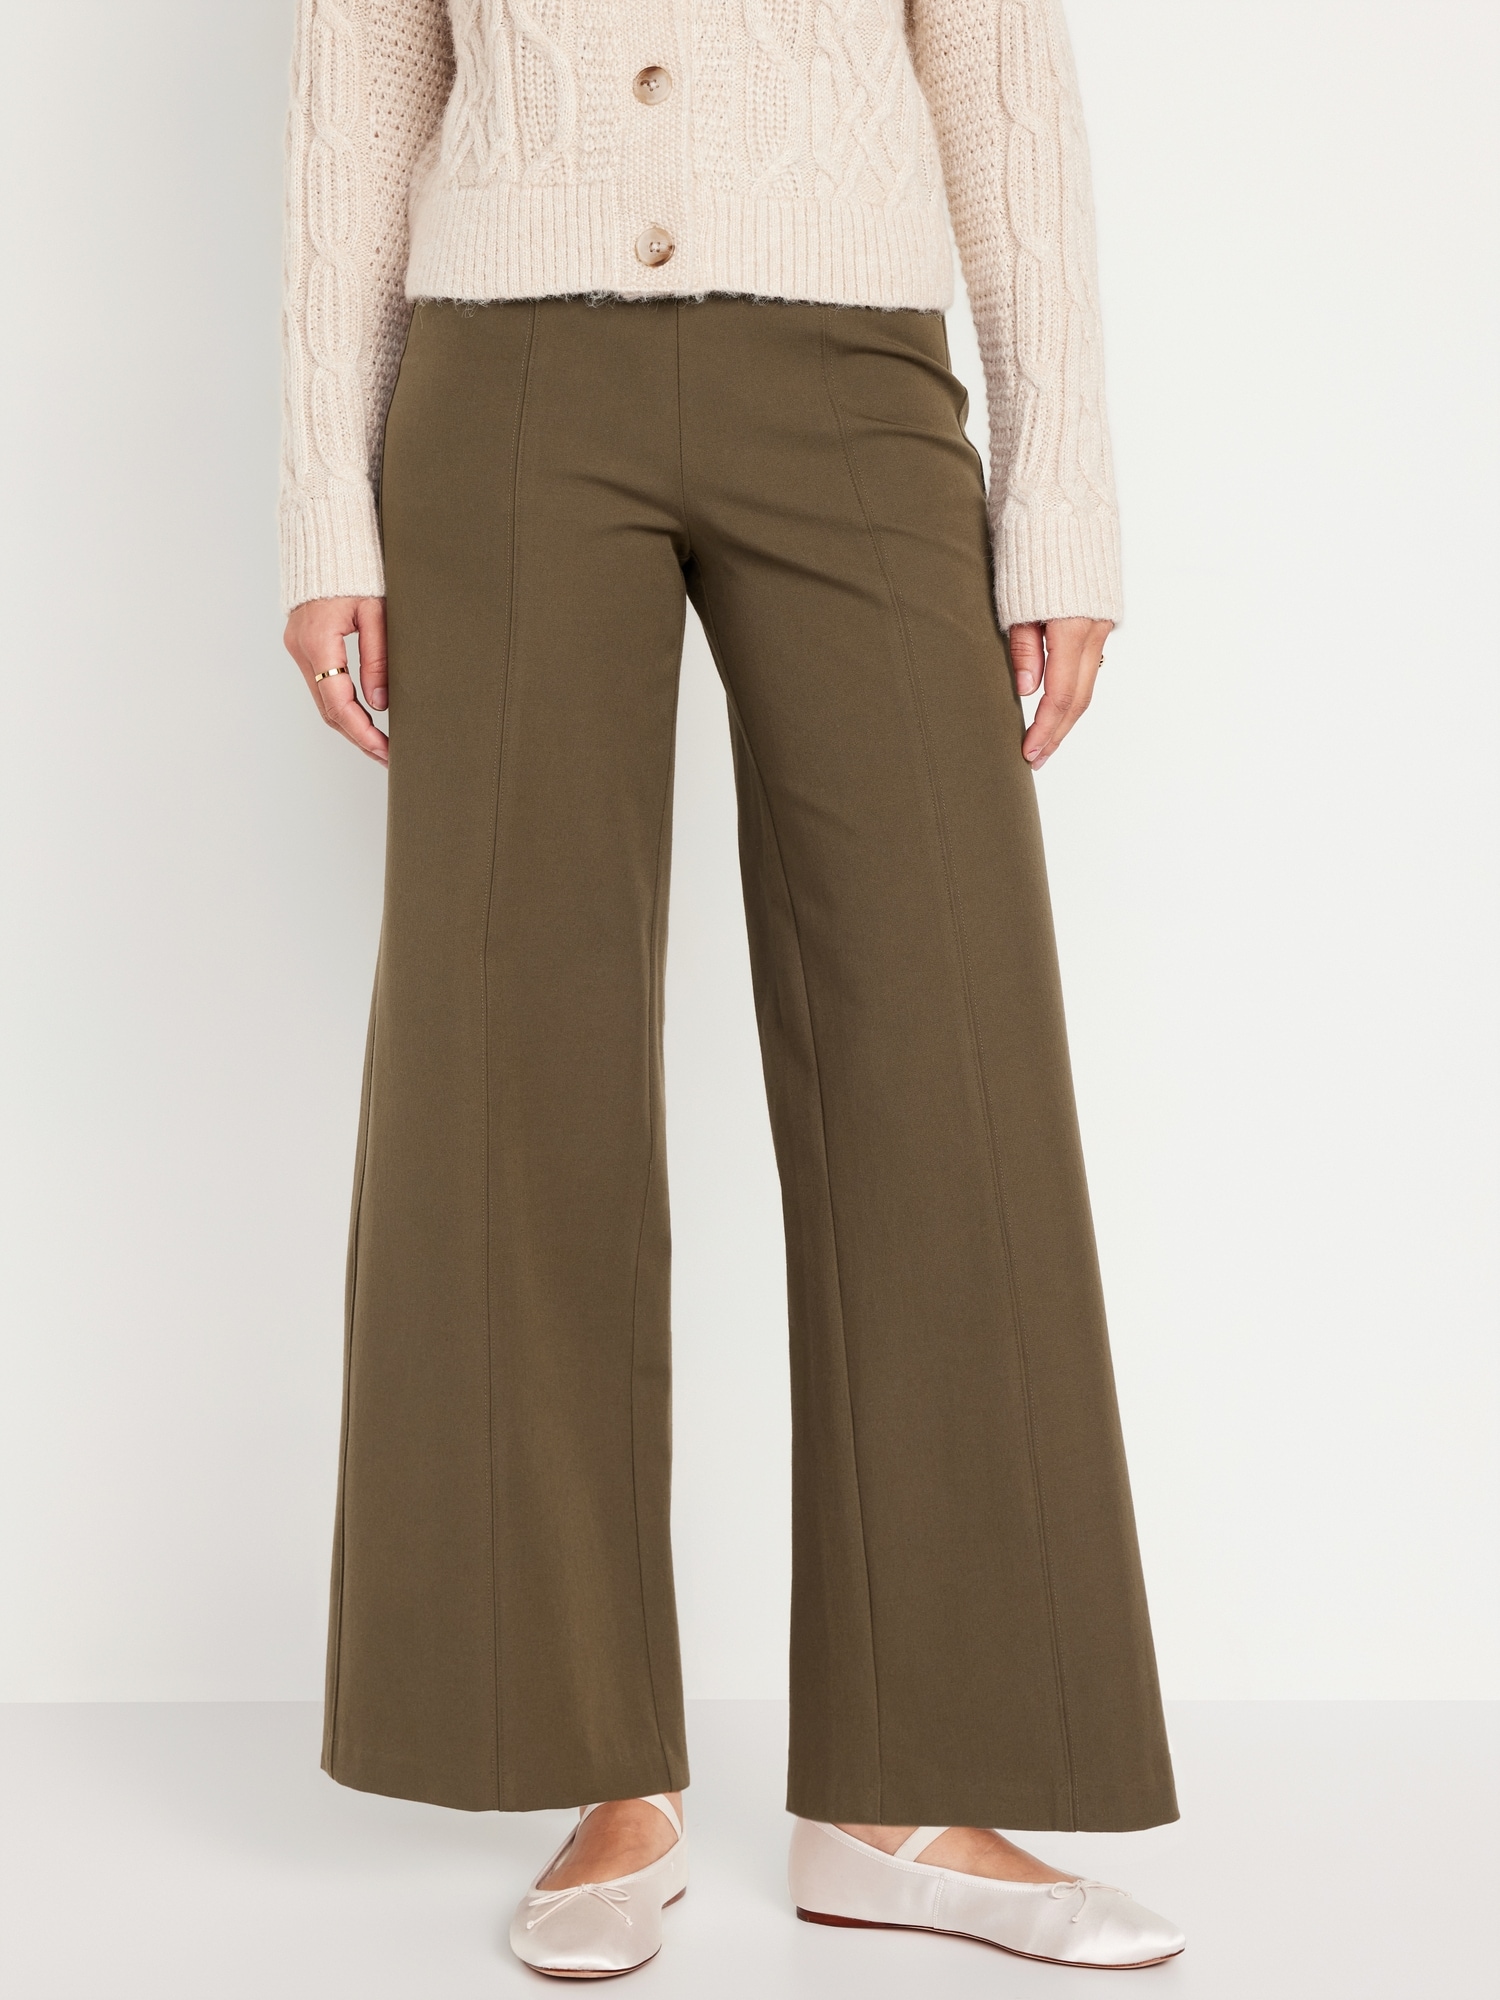 Old navy pixie pants $20 today , online & in-store : r/FrugalFemaleFashion